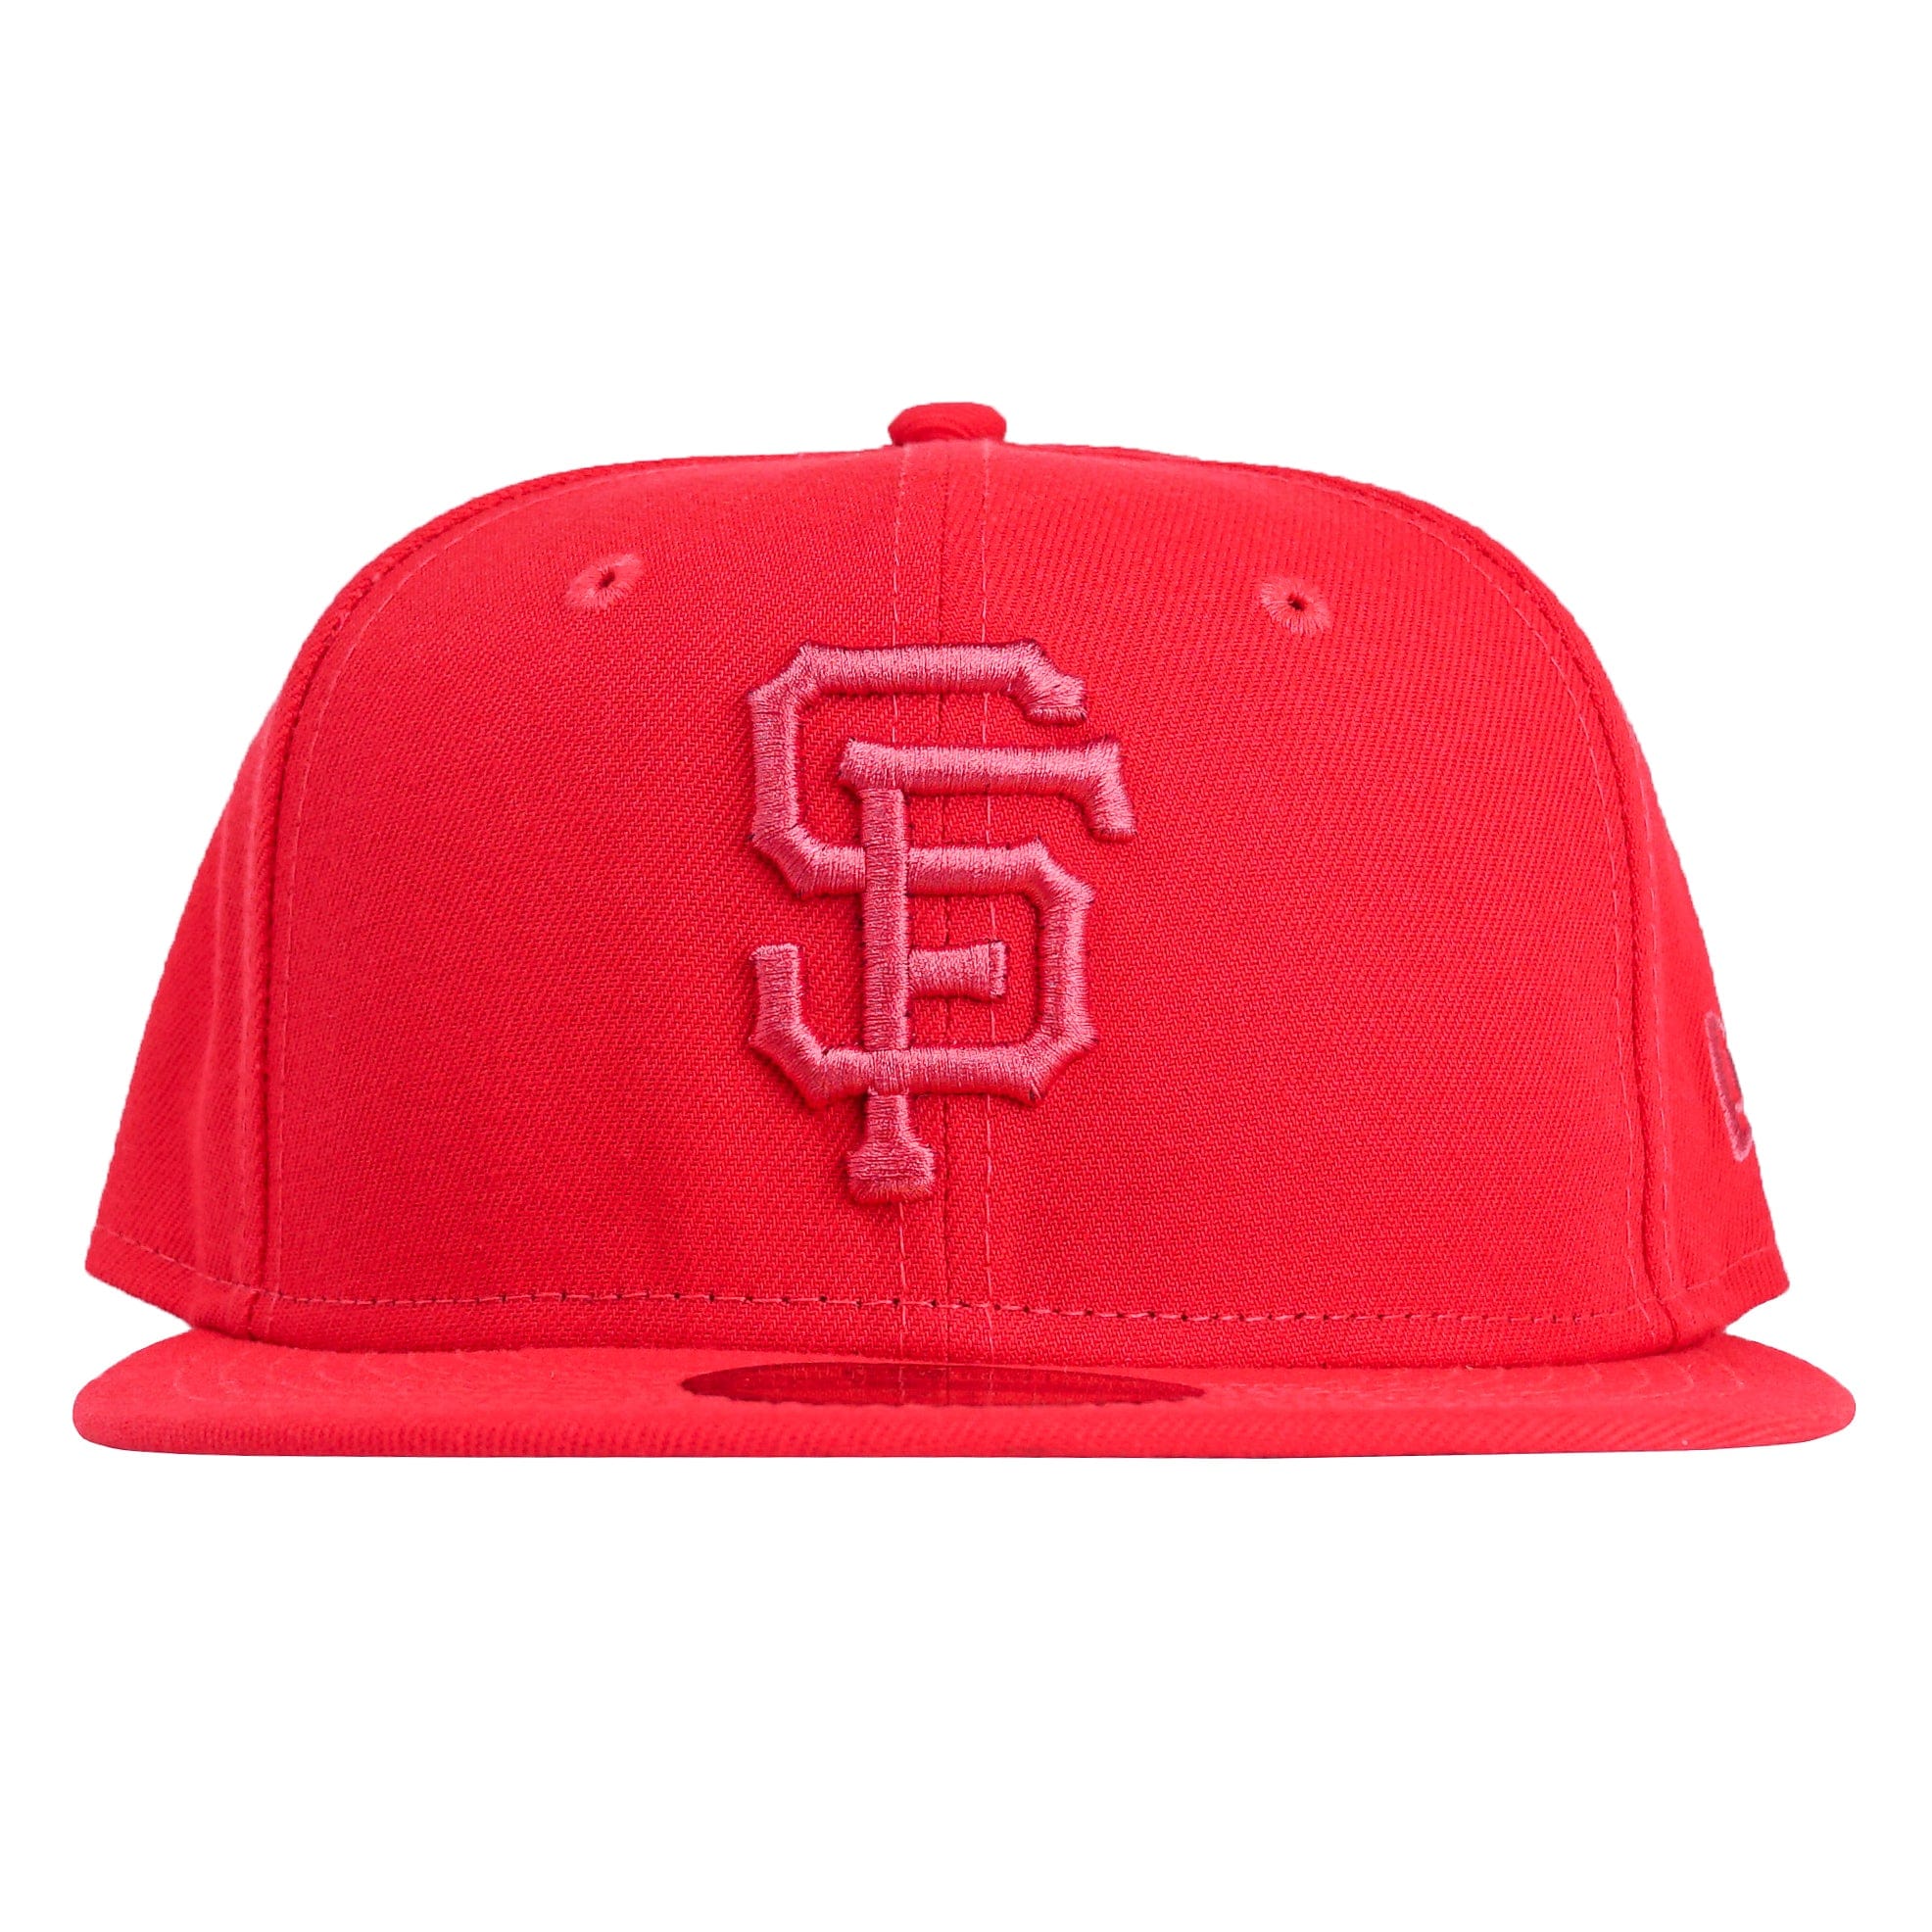 San Francisco Giants Colorpack 59Fifty Fitted Hat in strawberry